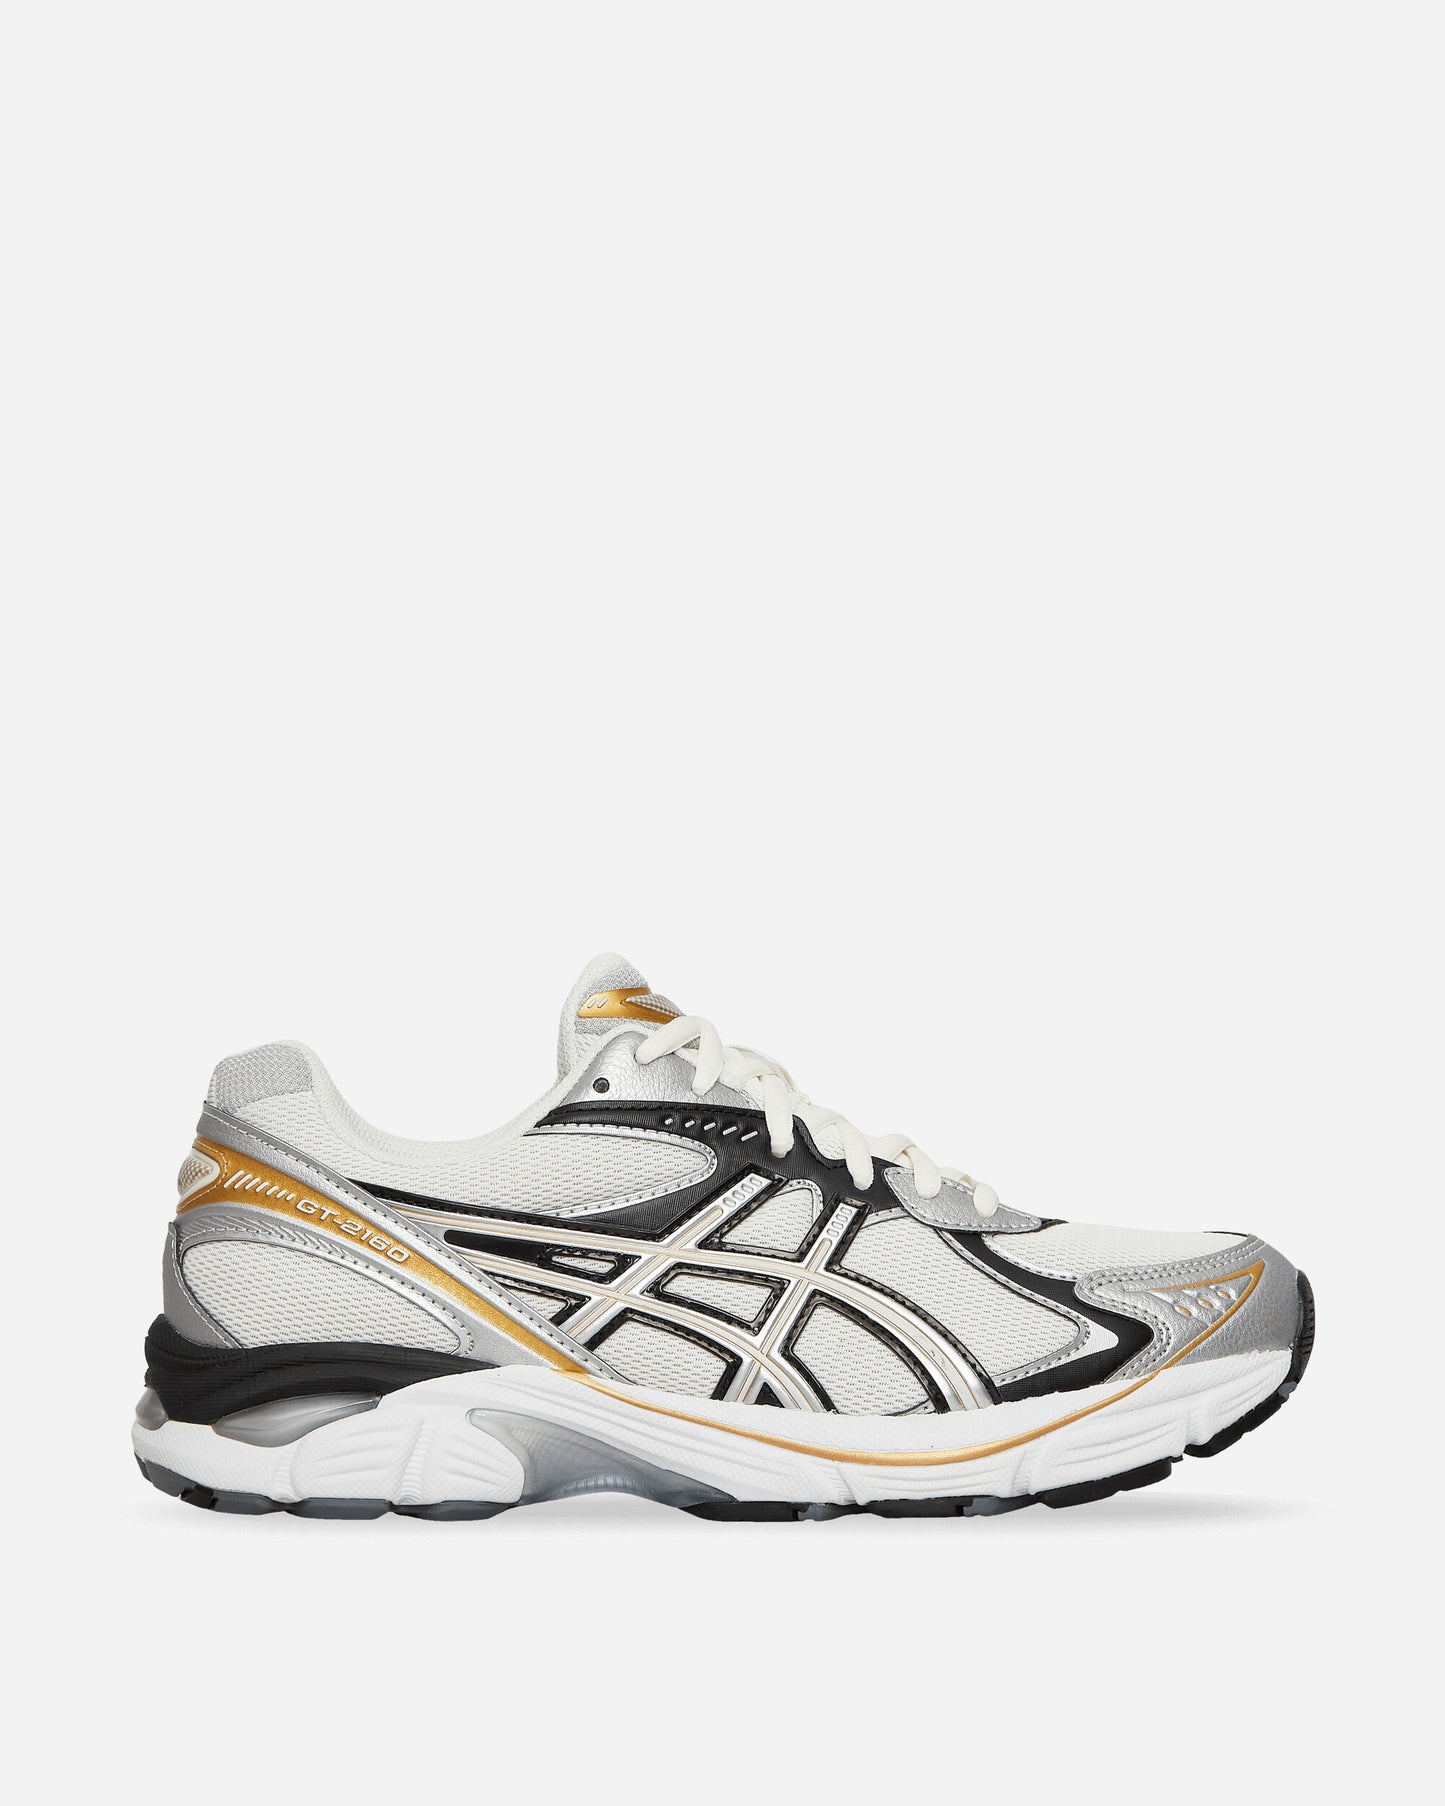 Asics Gt-2160 Cream/Pure Silver Sneakers Low 1203A320-100